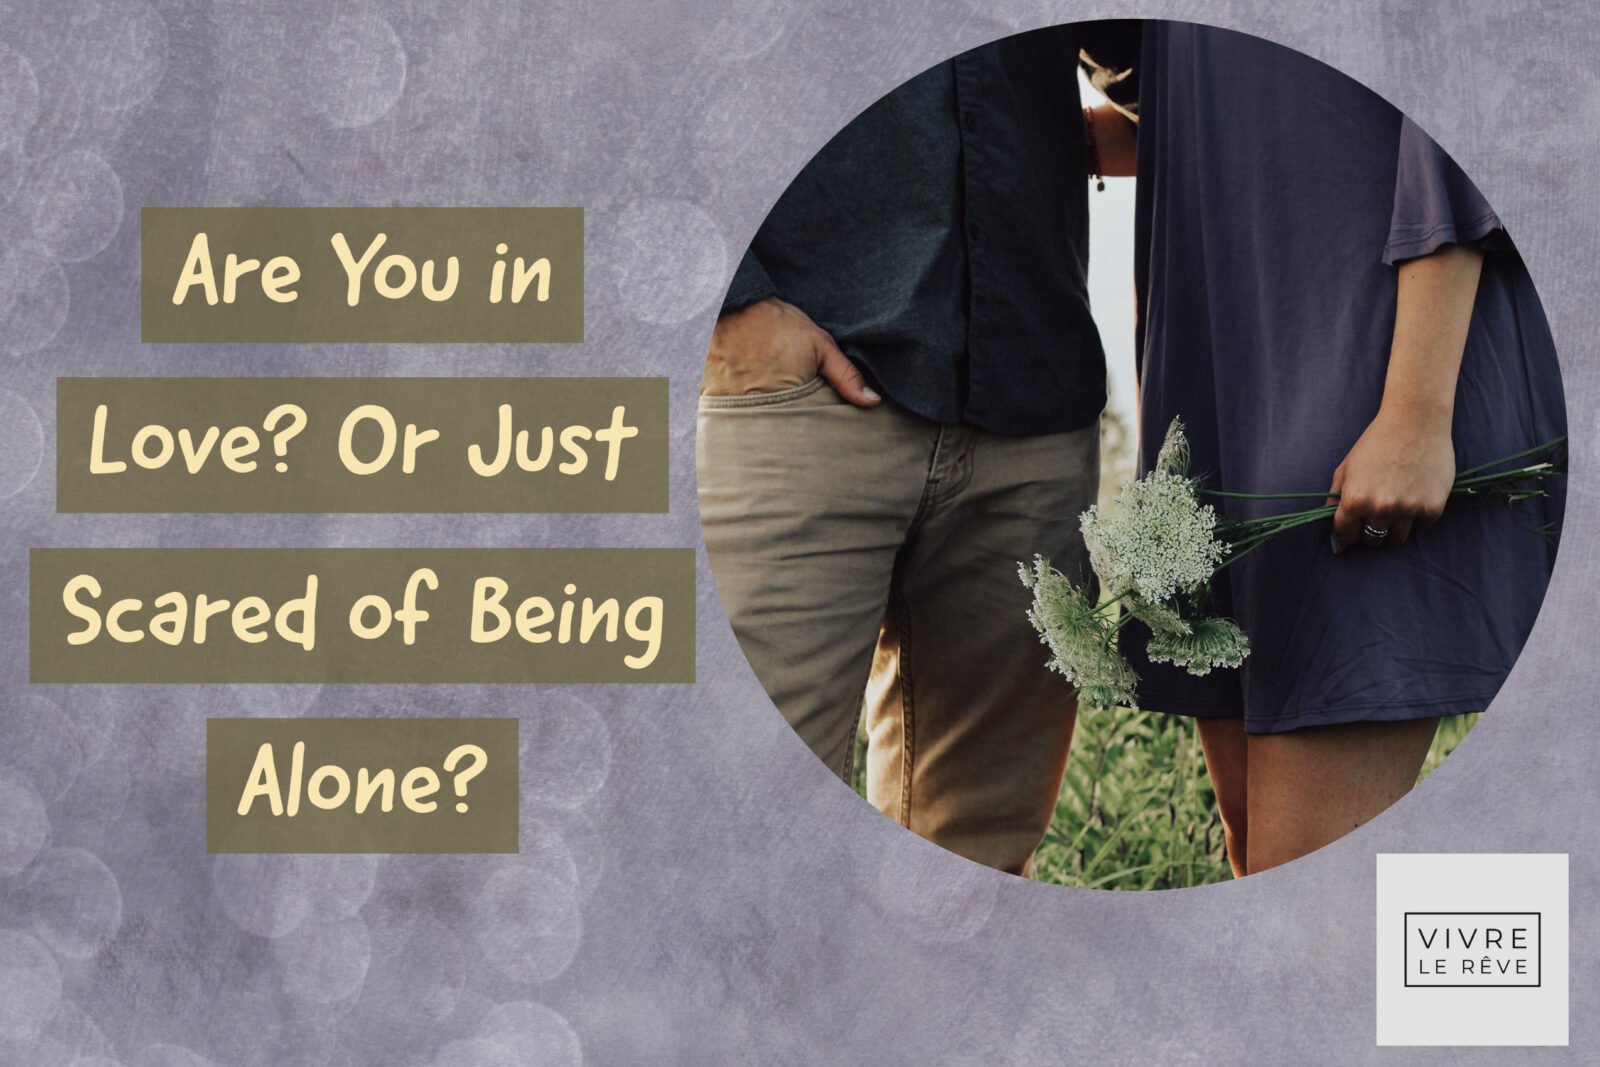 Are You in Love? Or Just Scared of Being Alone?